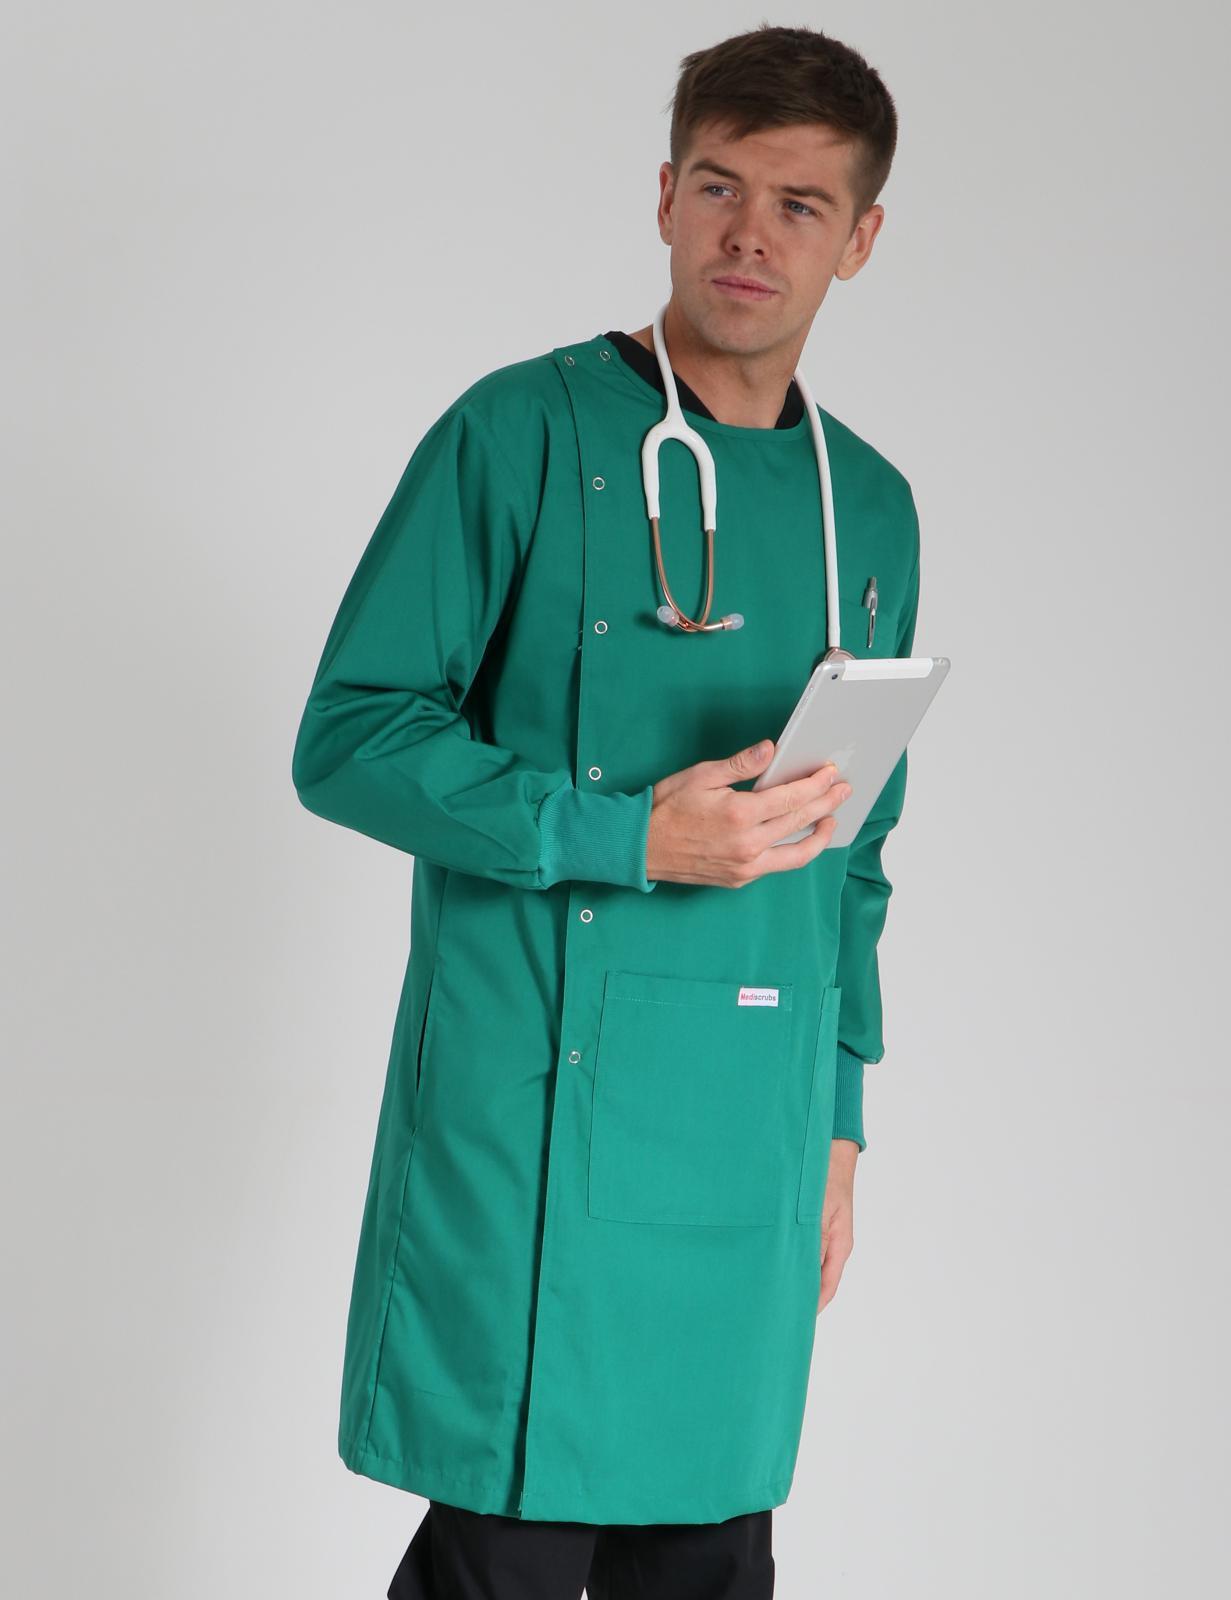 Lab Coats - Shop Our Wide Range of Quality-Made Laboratory Coats